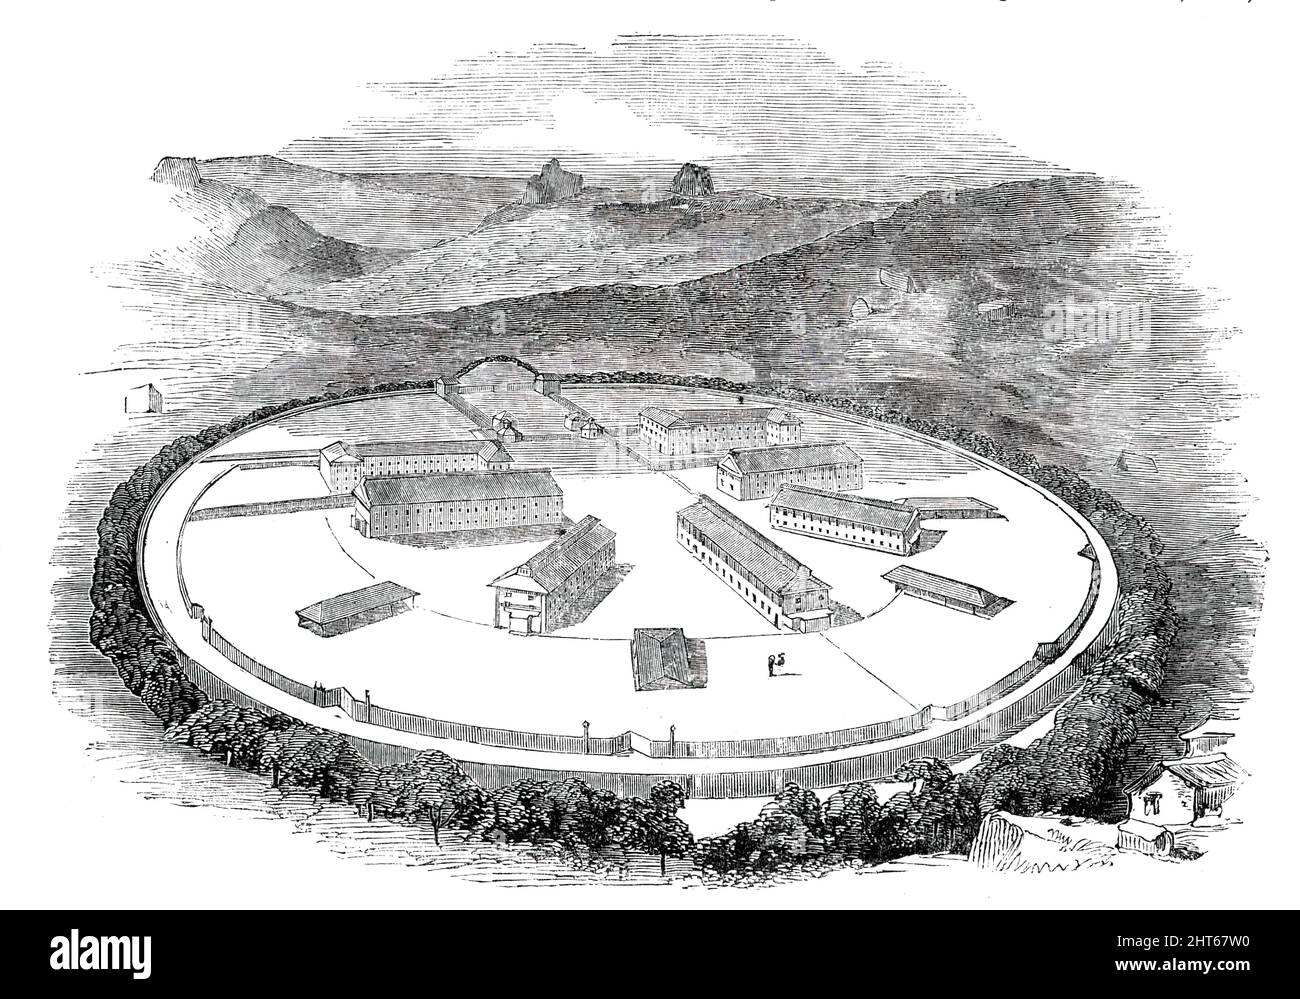 The War Prison, near Toy-Royal, Dartmoor, [Devon], 1850. 'The Government, in making Prince Town a convict station, might take the initiative with great advantage to the country...The situation presents employment for convicts in... extracting and dressing ores...cutting granite for public buildings...extracting felspathic minerals and limestone; grinding coprolites, and converting them into fertilizers; cutting peat for carrying on these processes...A bondage spent in labours like these could not fail to have the effect of converting the greater part of prisoners into characters capable of mai Stock Photo